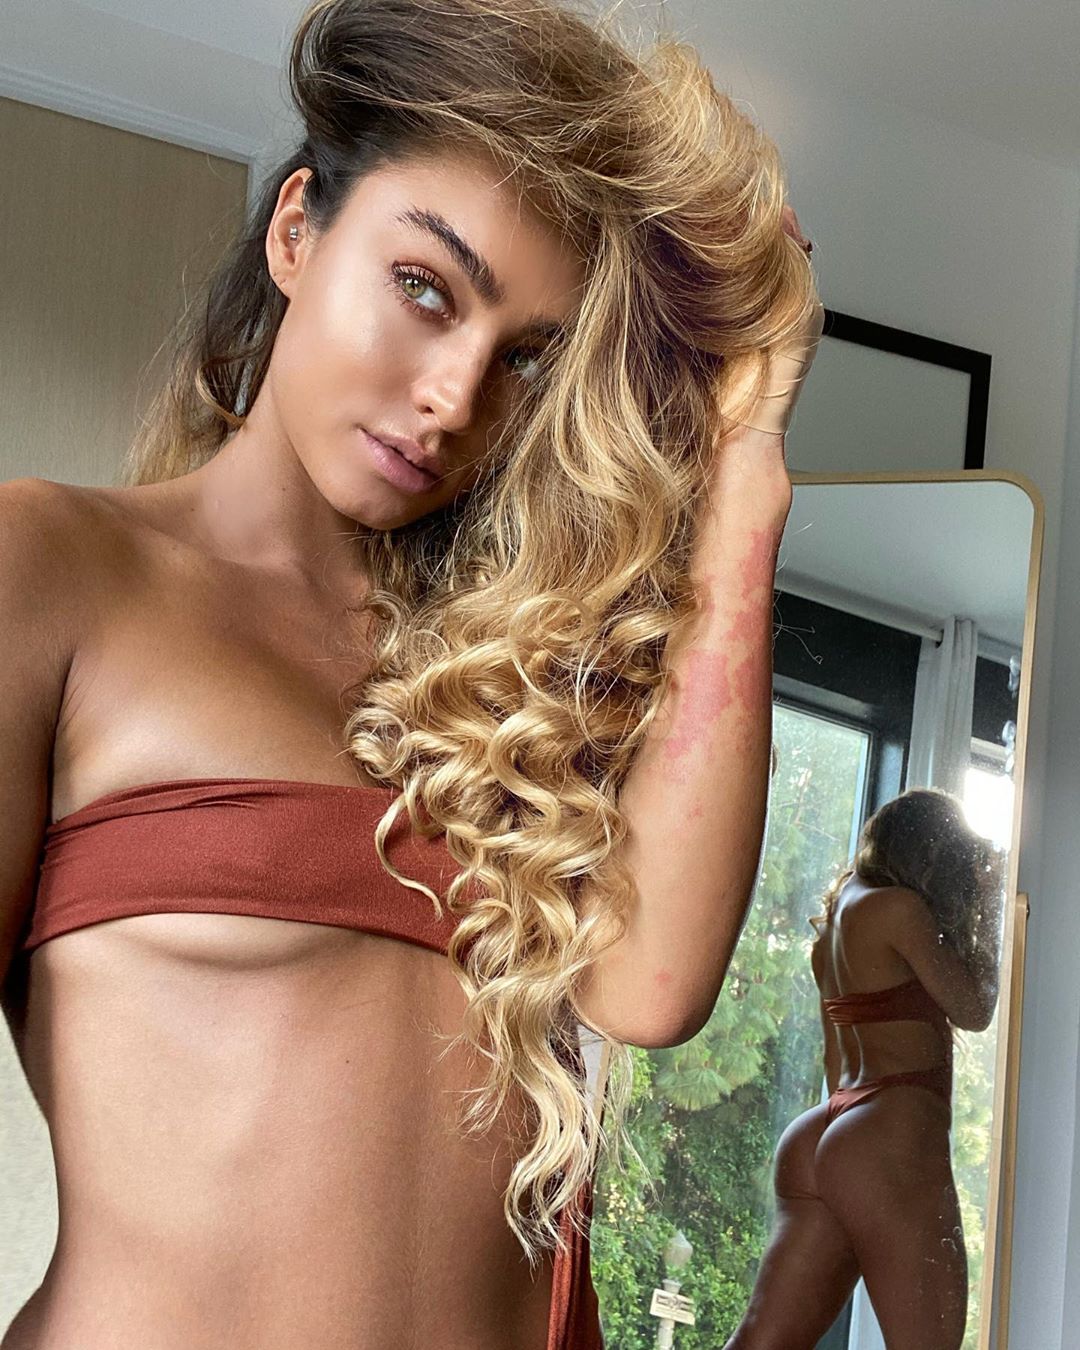 Sommer Ray (@sommerray) - Lates Instagram images and videos.